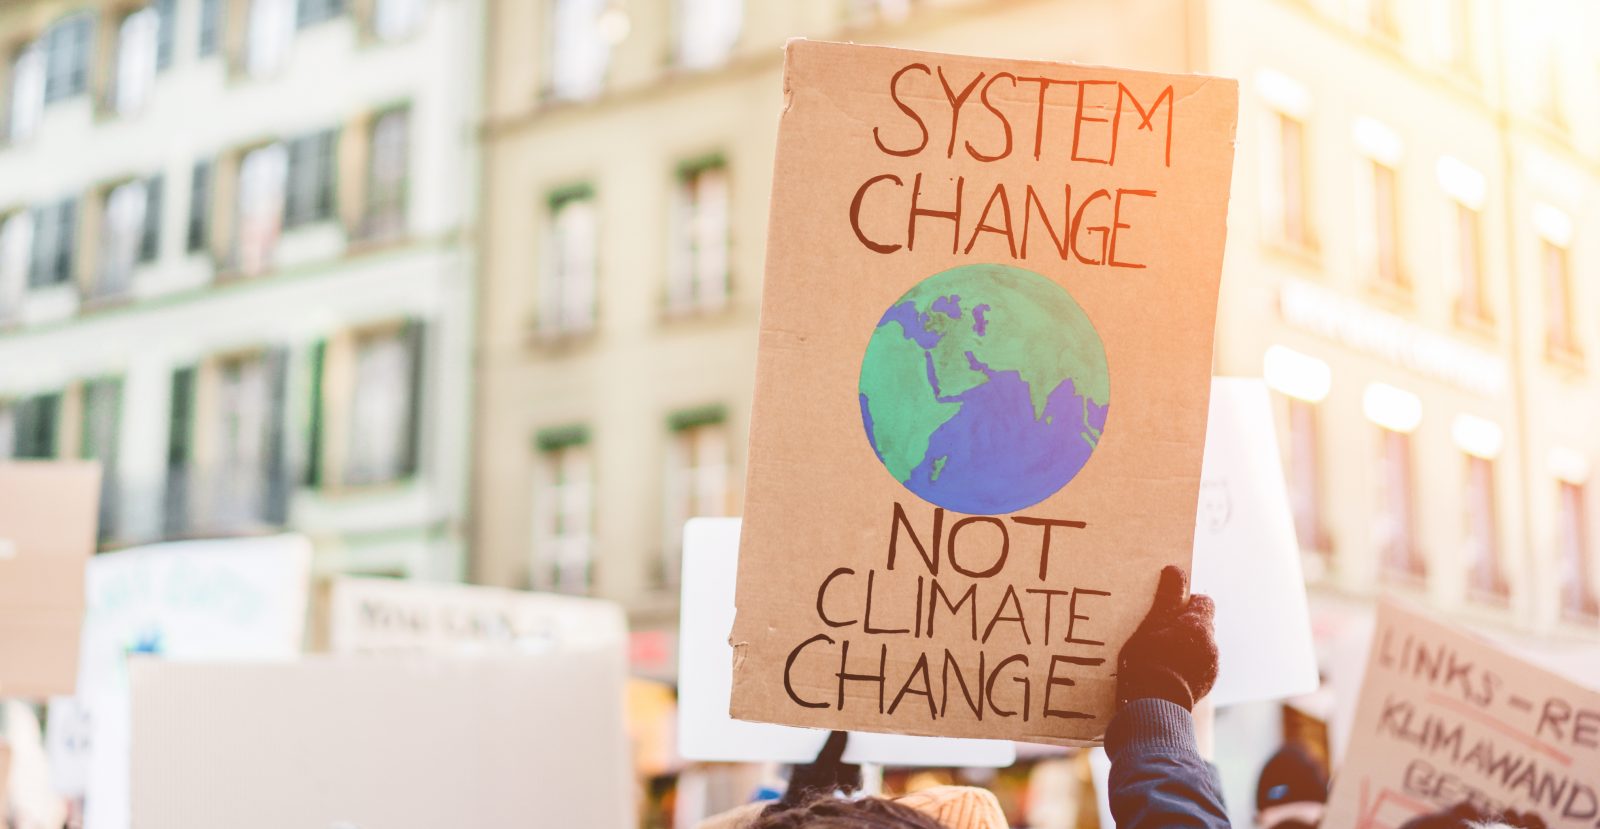 A protestor holds a sign saying "System Change Not Climate Change"